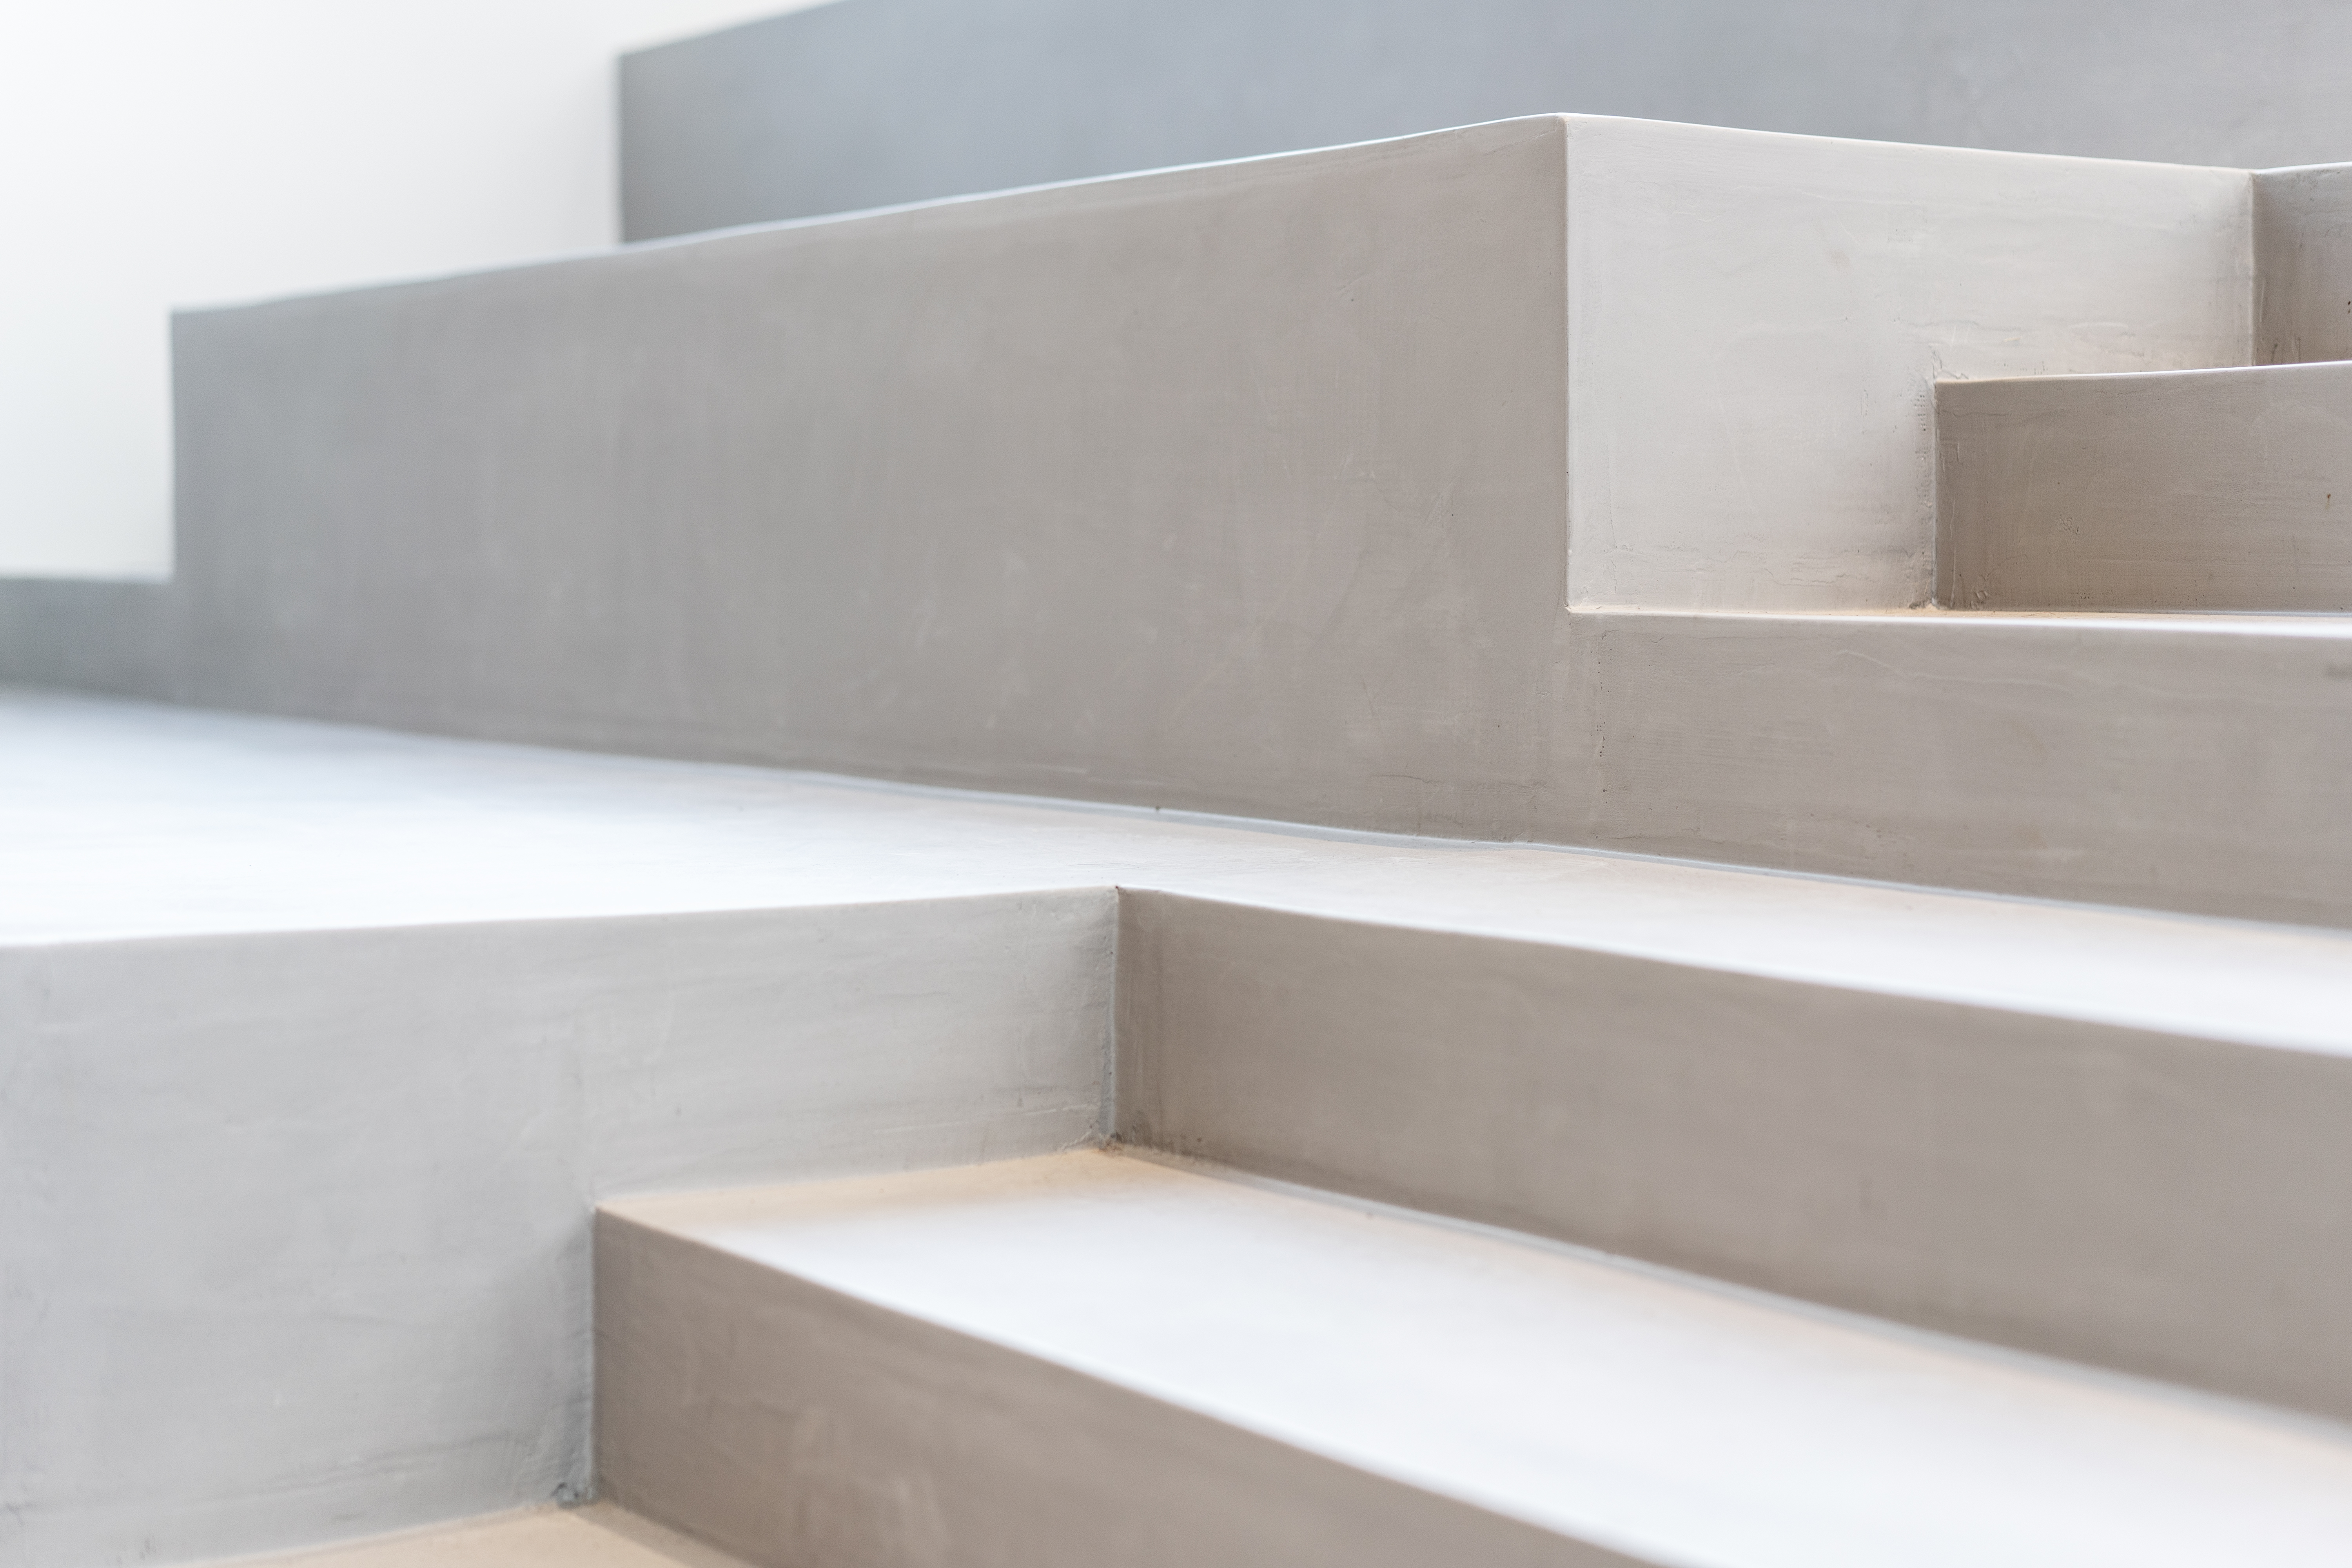 White concrete stairs. Implying the steps in finding the right board member. Watson Inc.